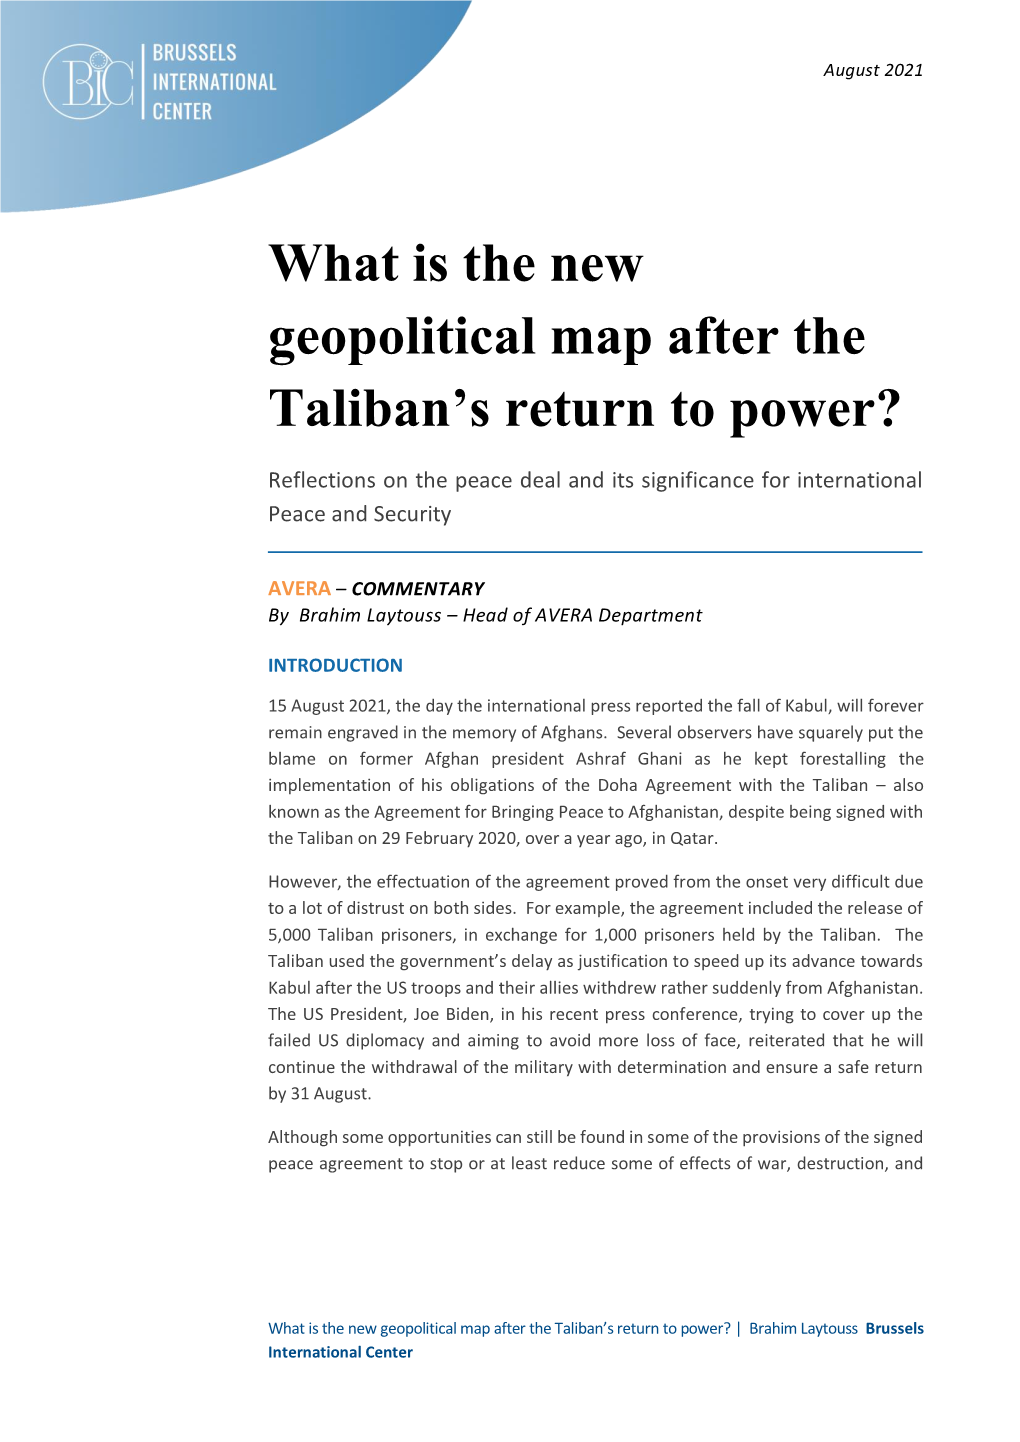 What Is the New Geopolitical Map After the Taliban's Return to Power?